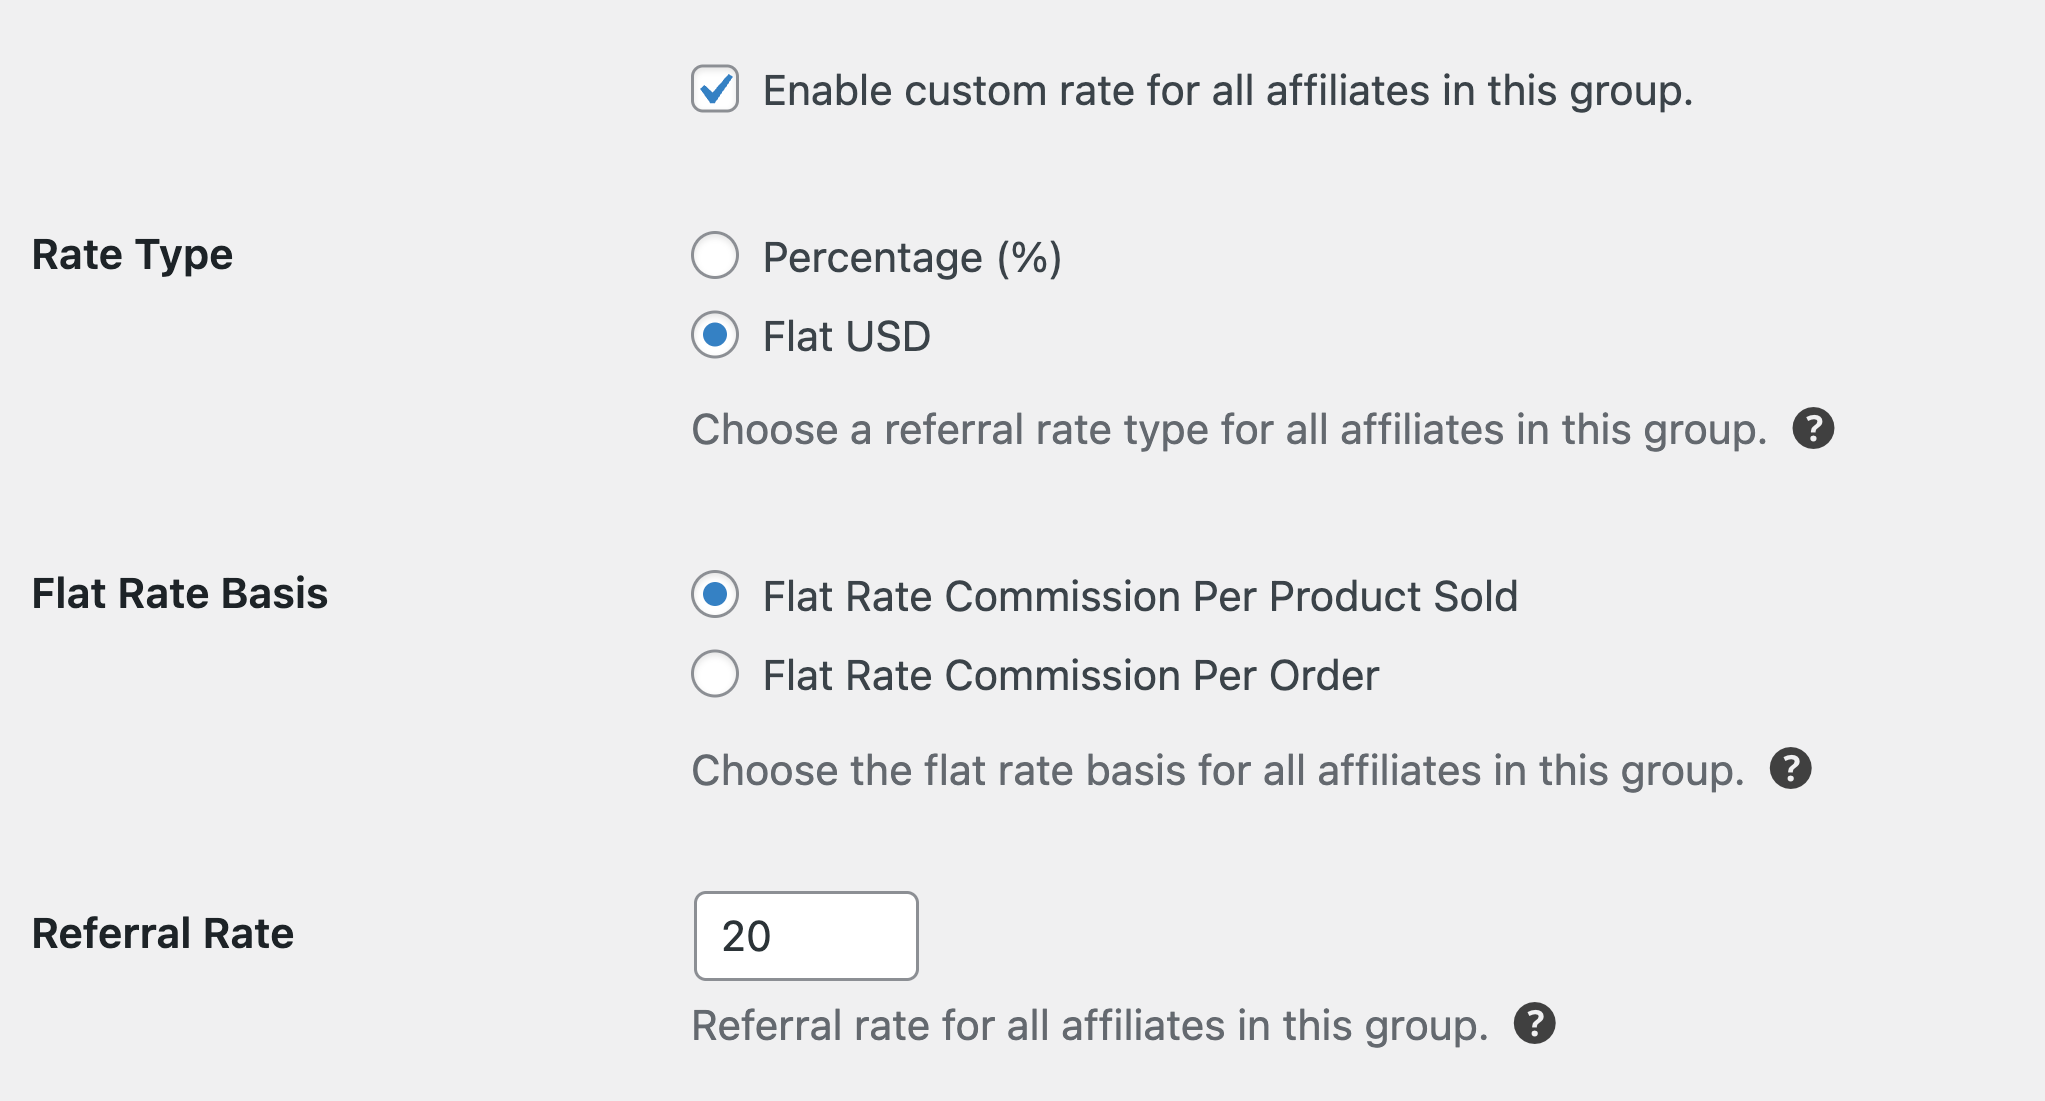 Enable custom rate for all affiliates in this group.